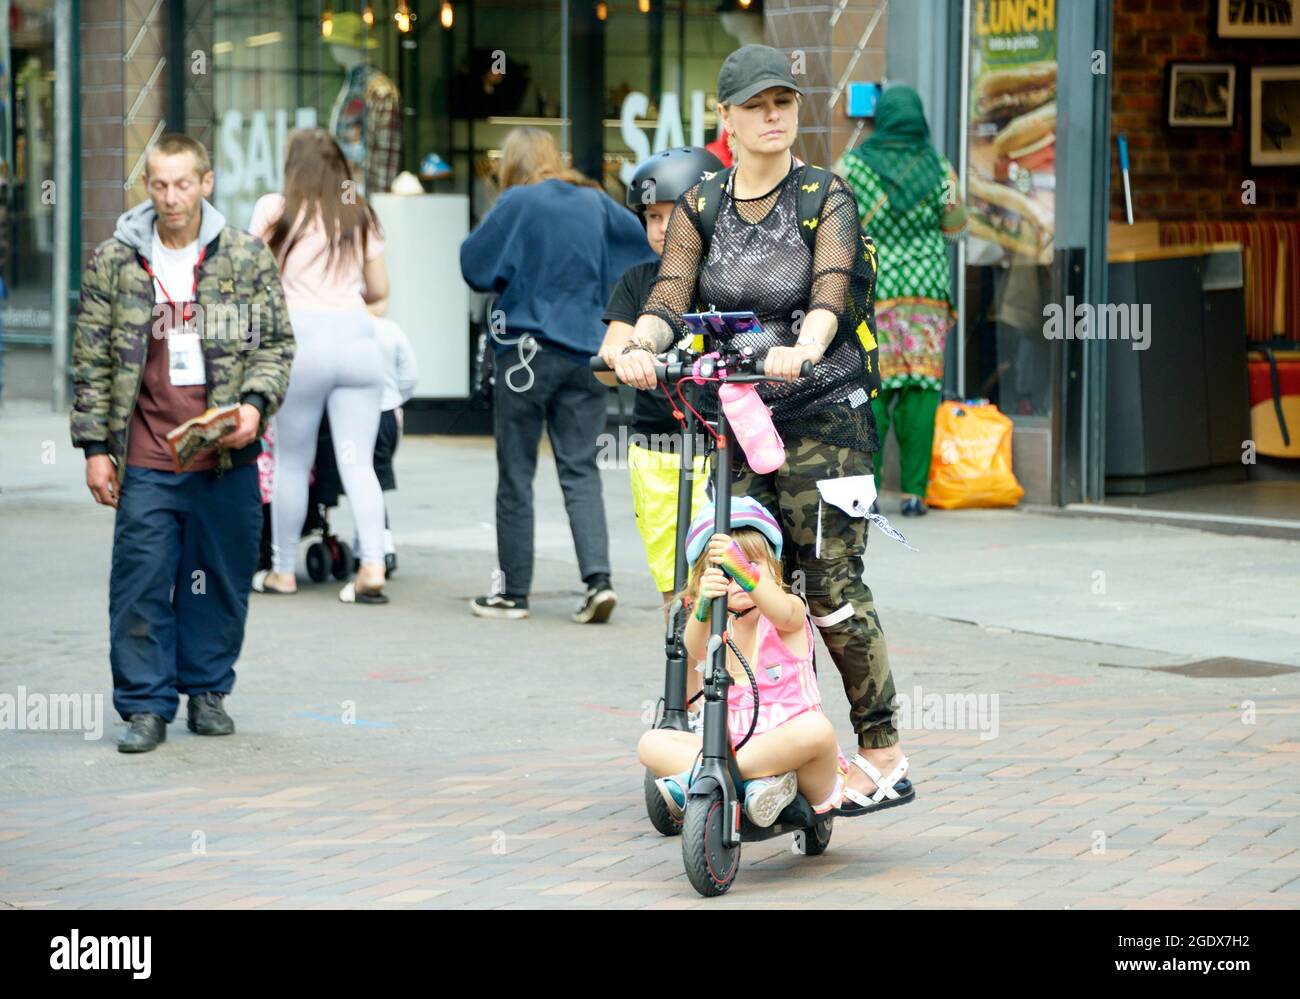 Family on electric scooters, in the City Stock Photo